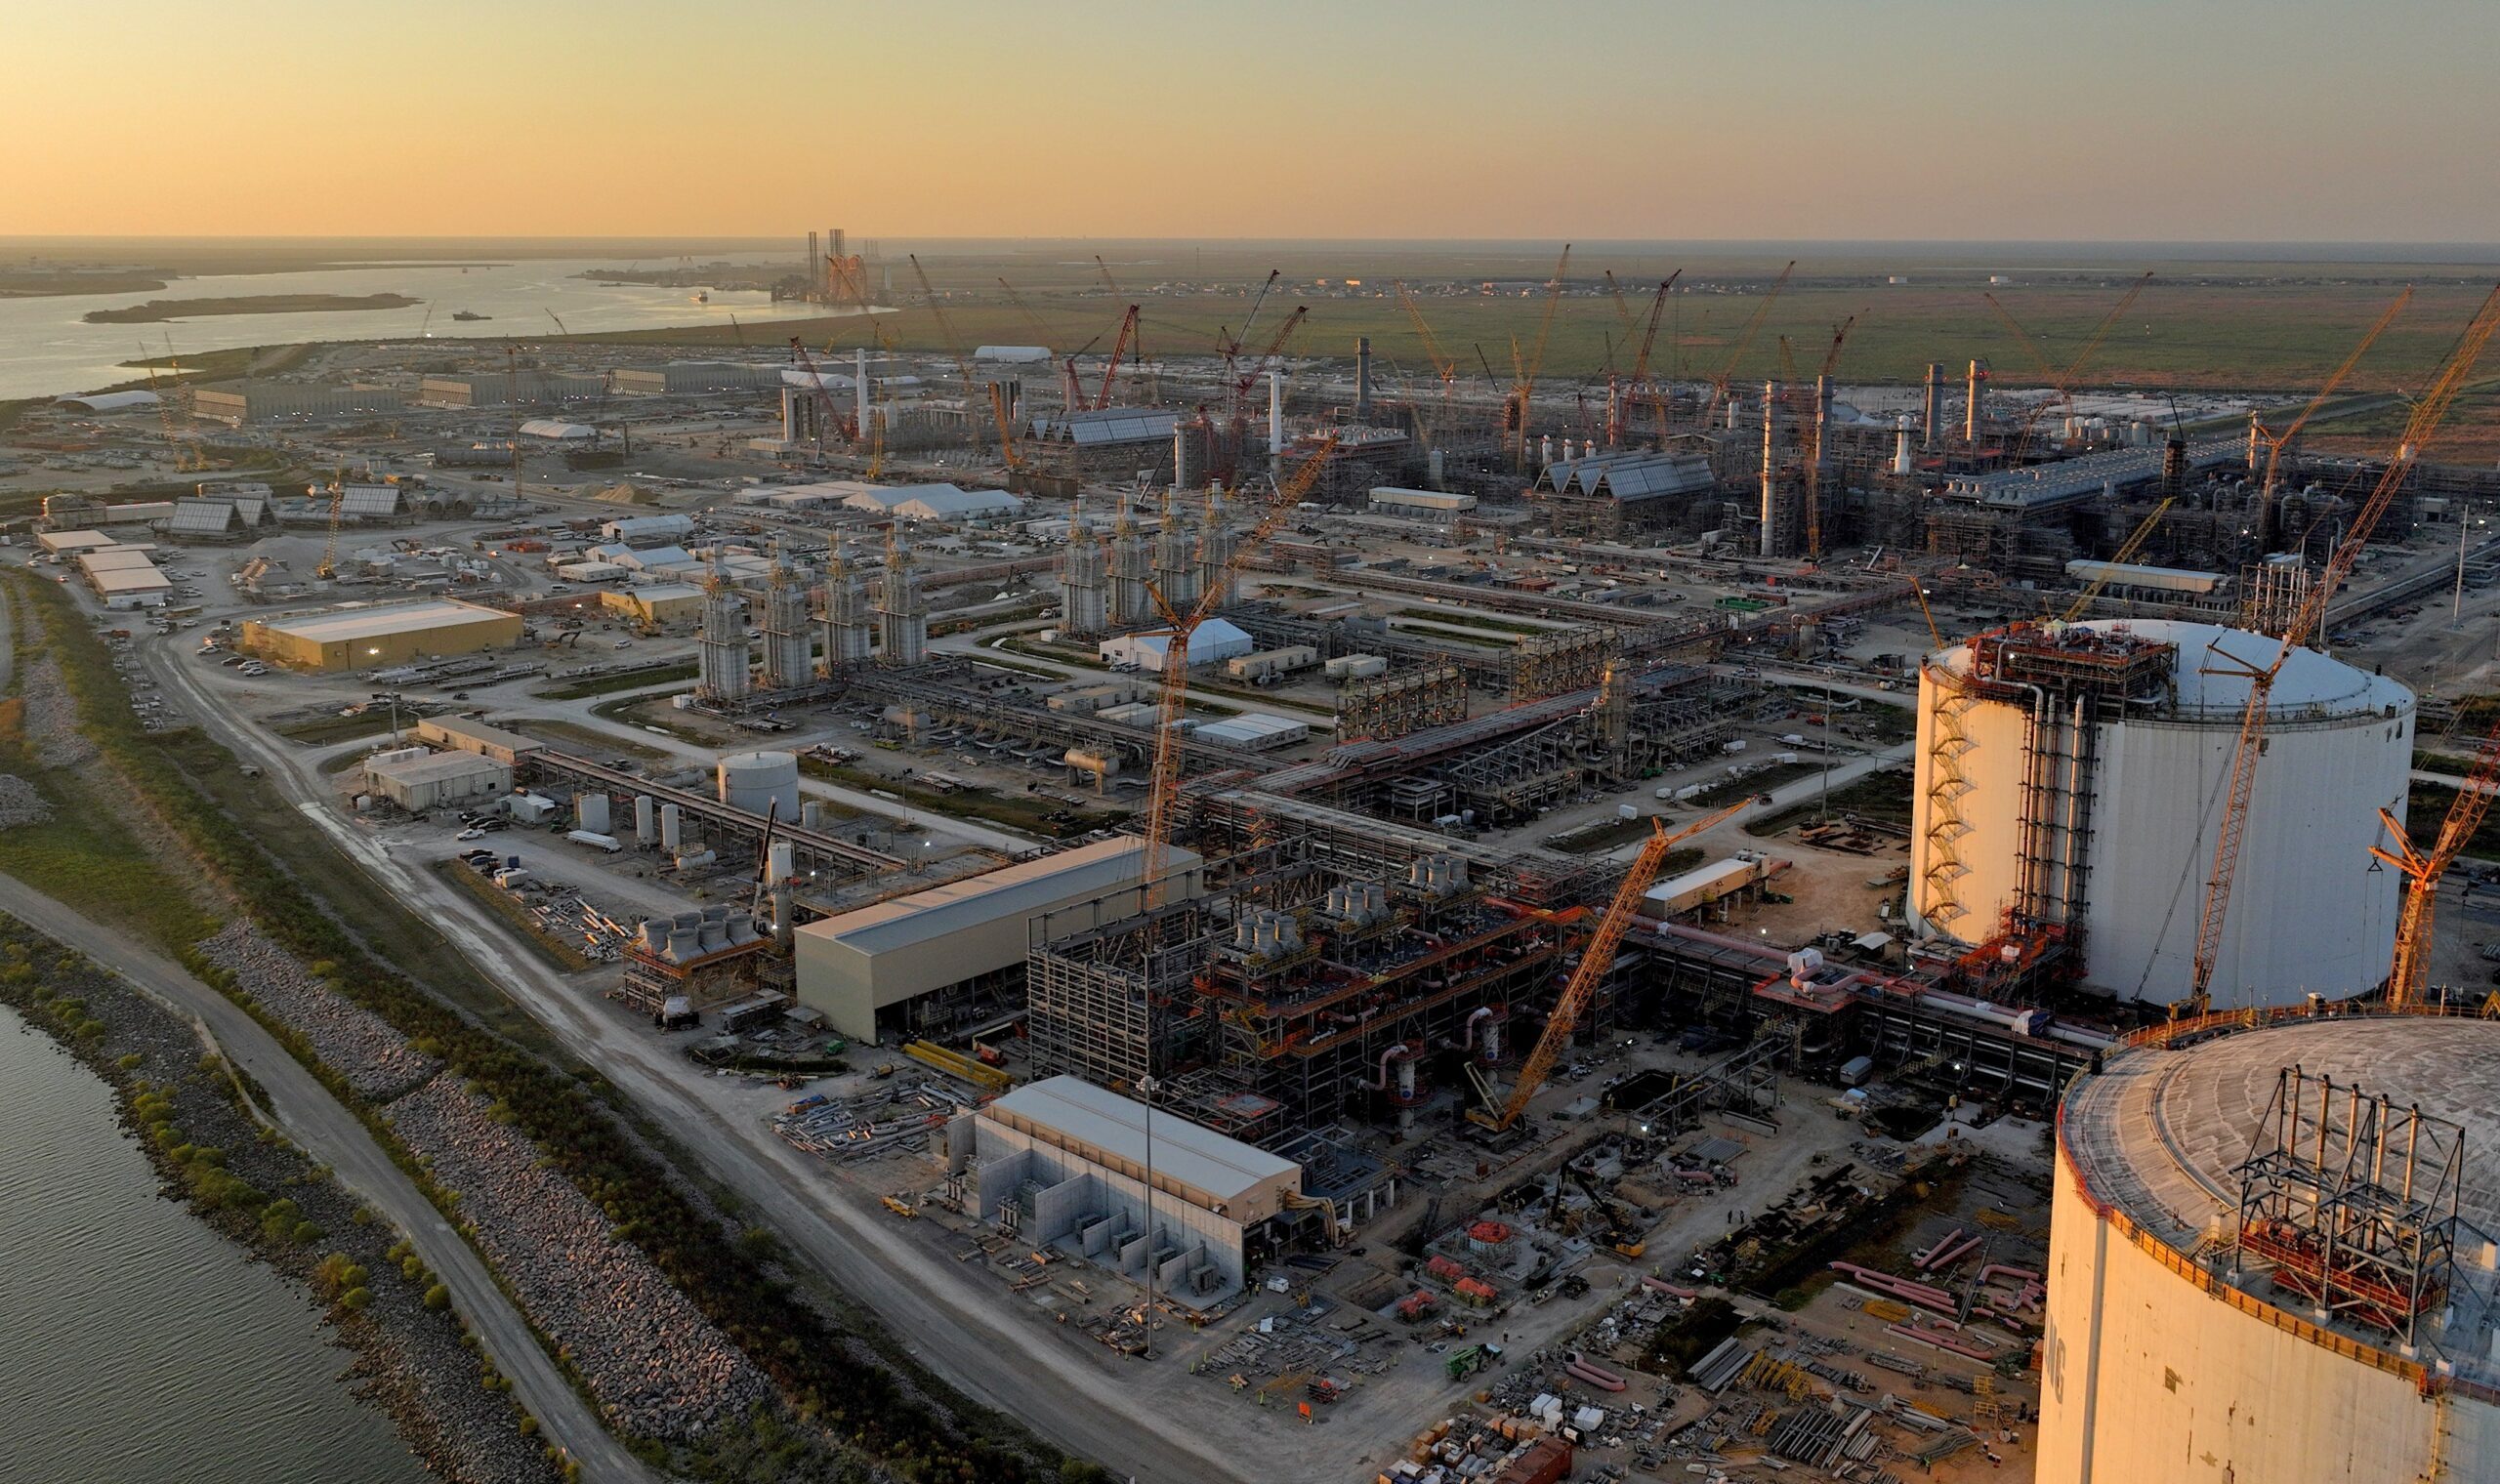 The under-construction Golden Pass LNG facility in Texas